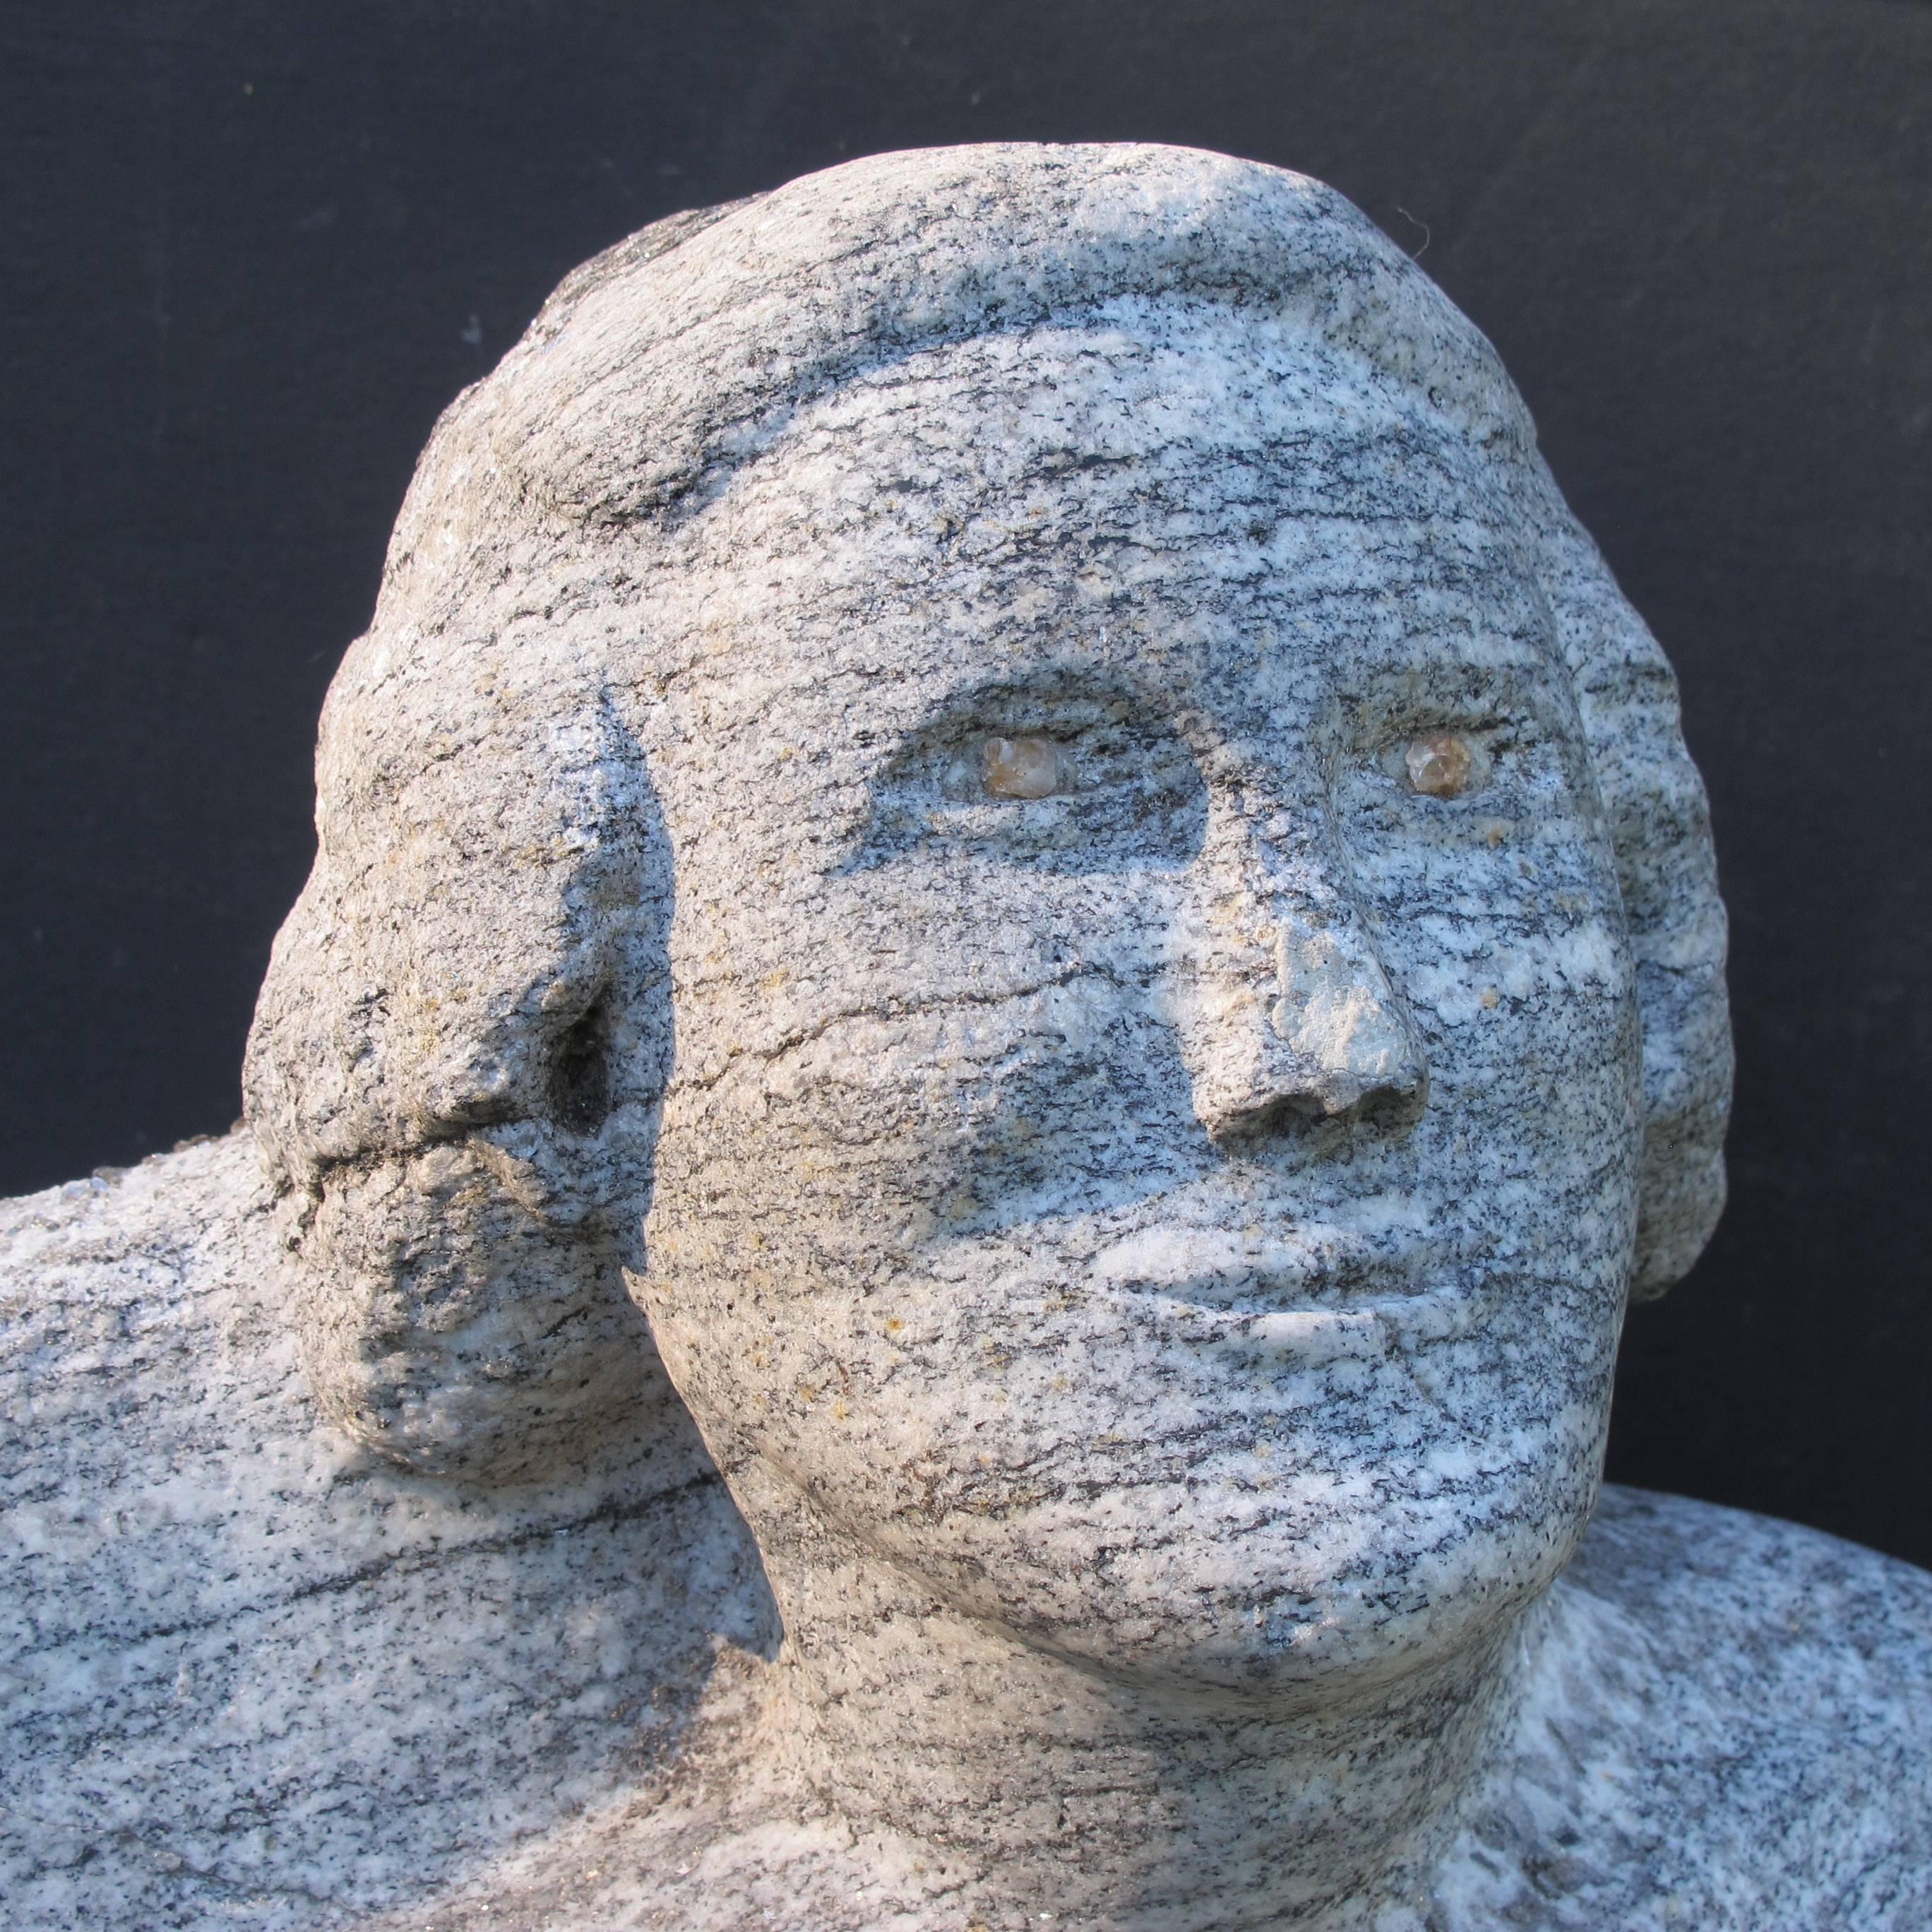 The head of George Washington gazing upward emerges from this banded crystalline piece of granite. There appears to be an inlay in the center of the eyes. I had owned this bust many years ago and sold it to the Kristina Johnson Collection in